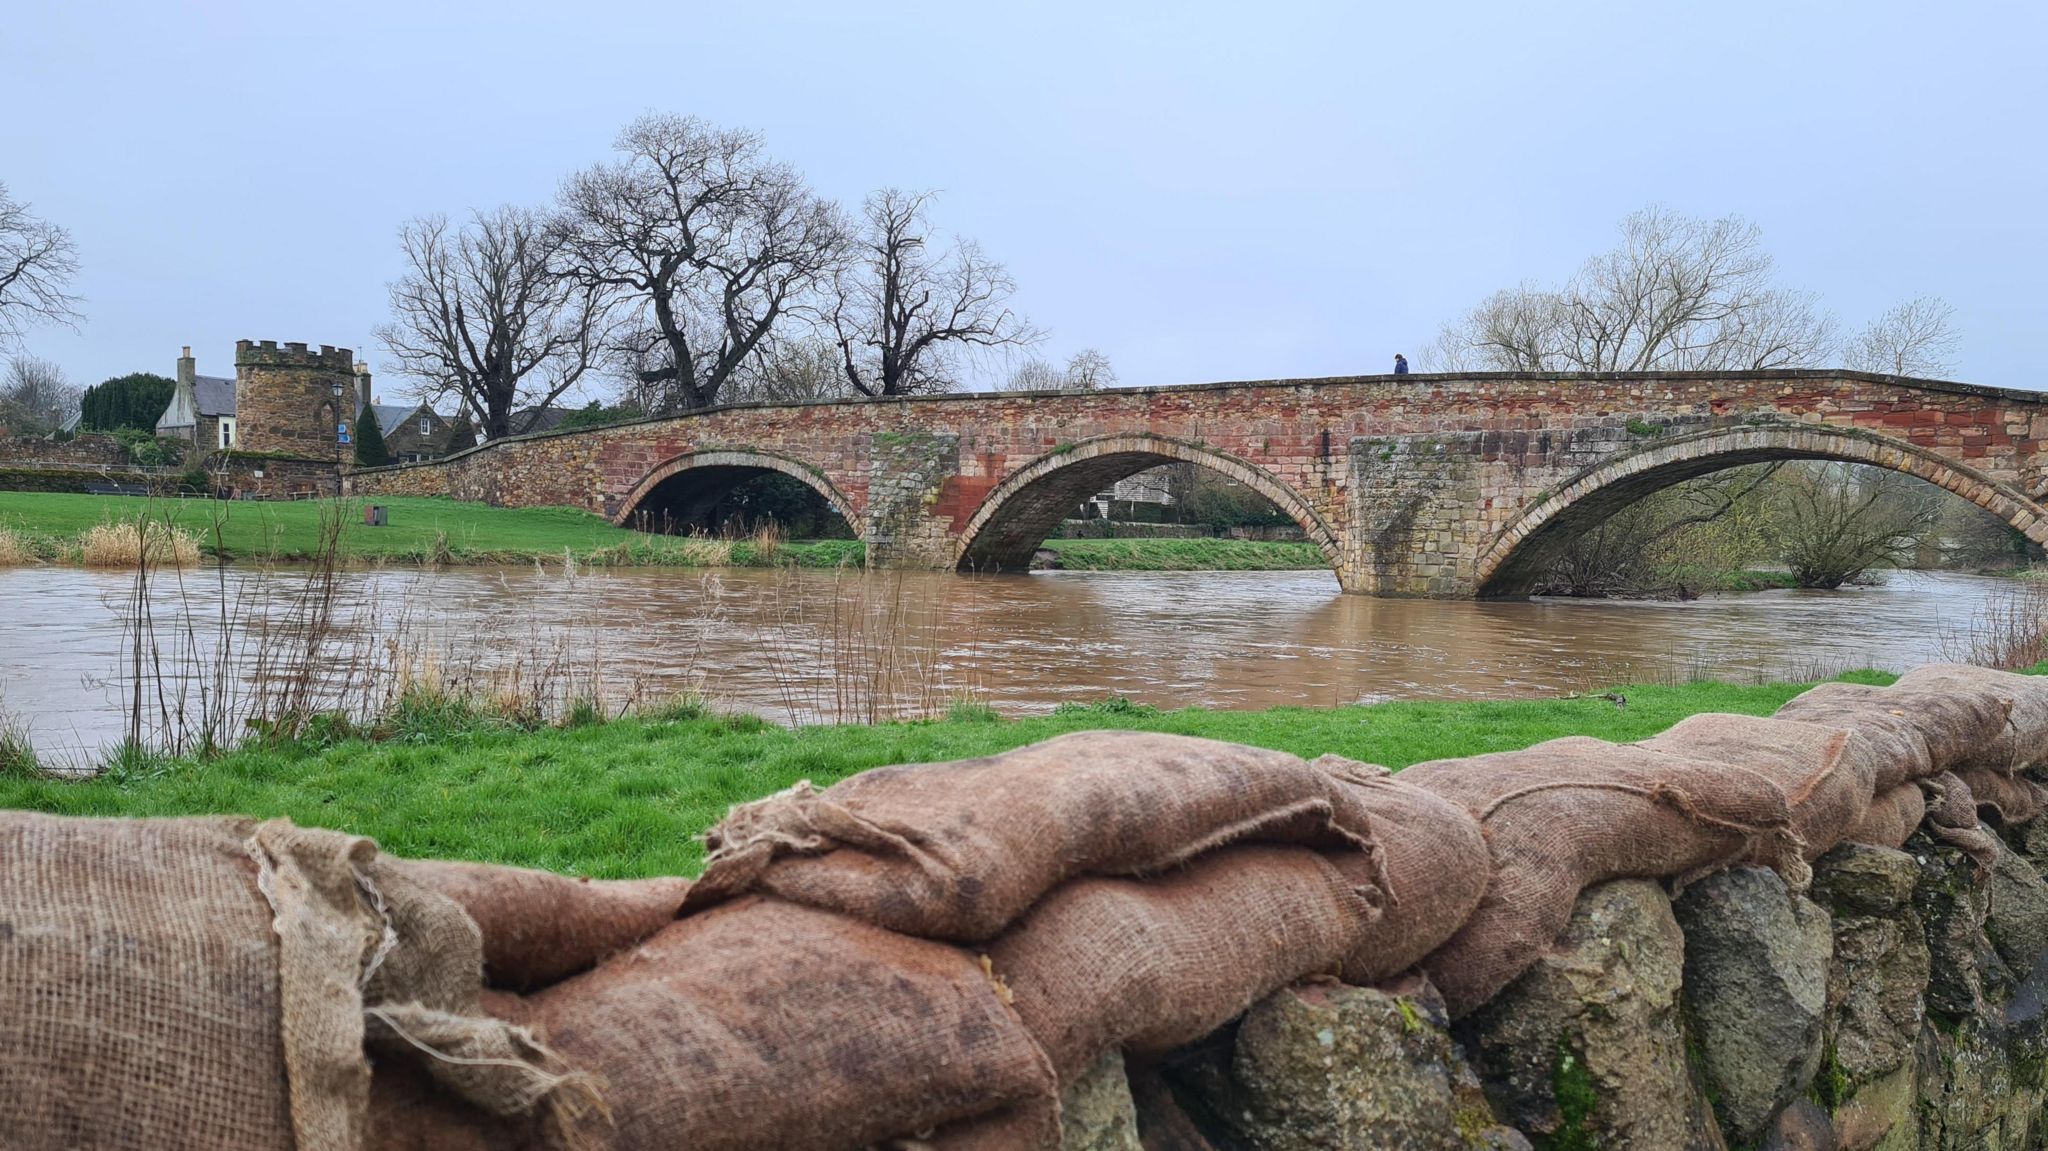 Photograph of a swollen river that has filled out onto the flood plain.  In the foreground a stone wall that has sandbags laid on top.